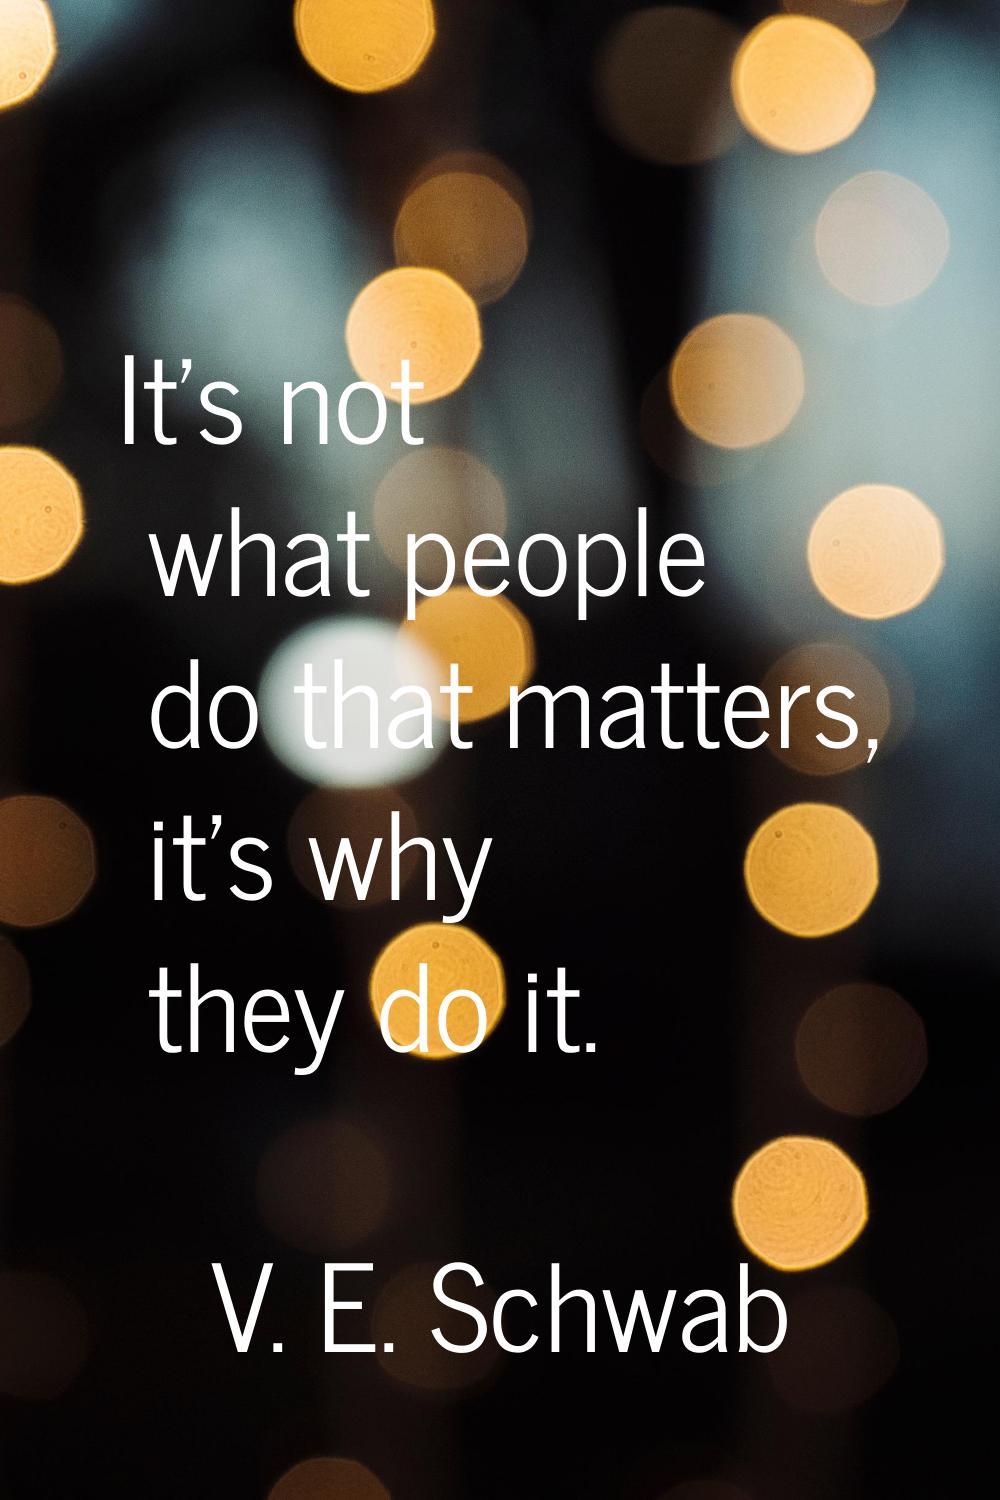 It's not what people do that matters, it's why they do it.